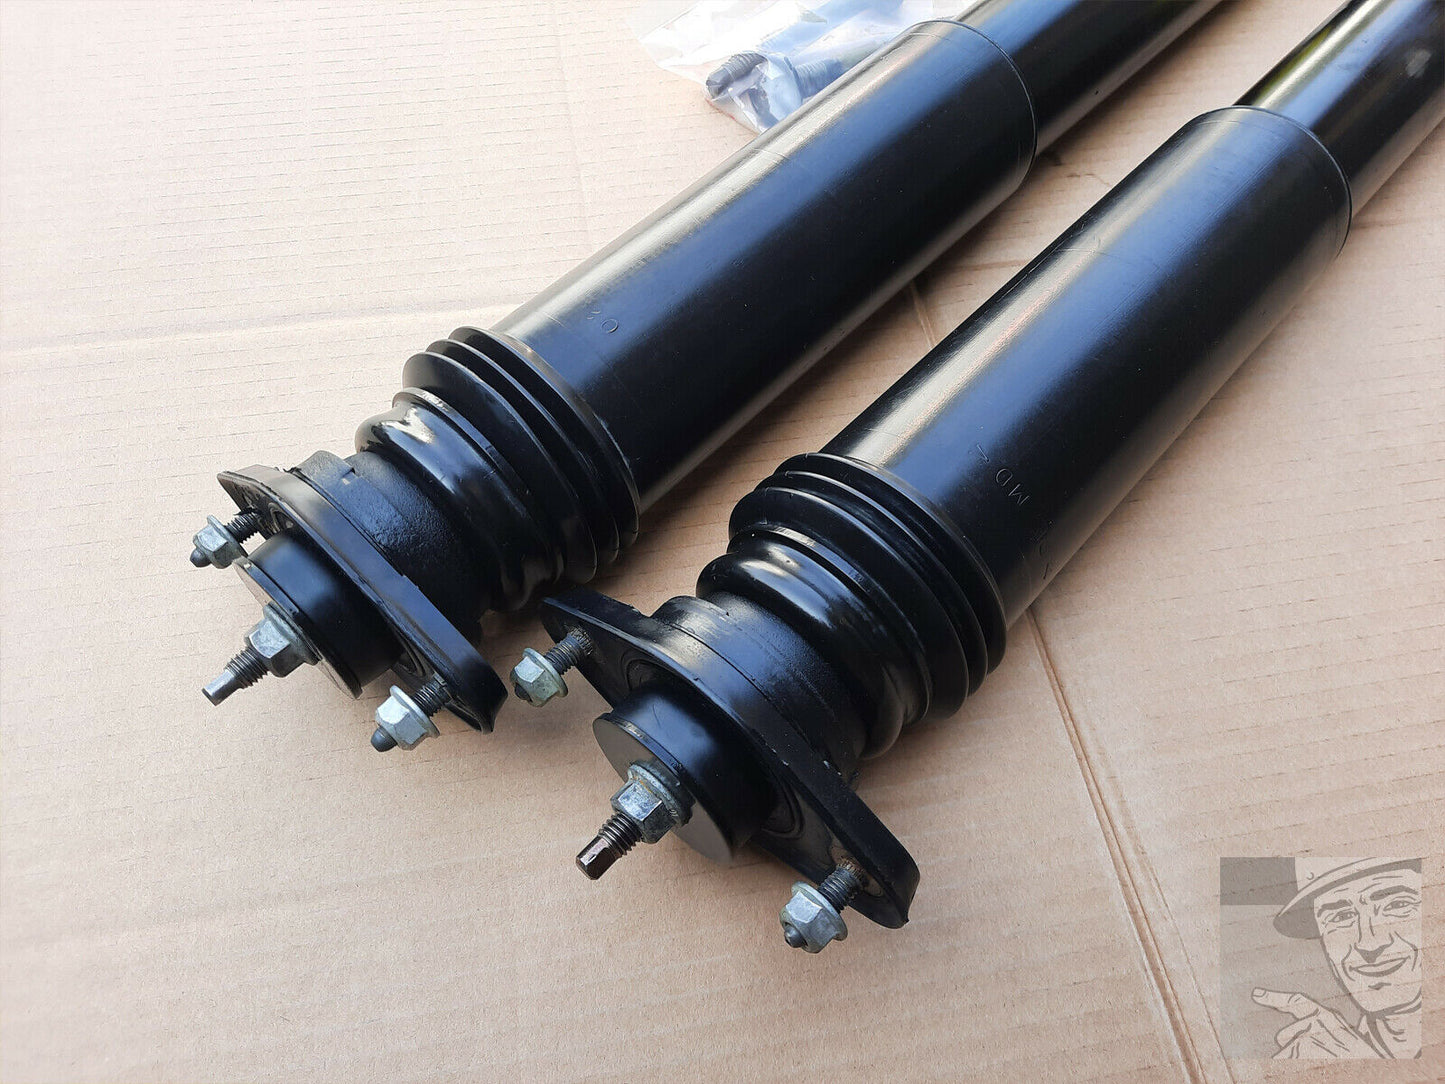 Original Equipment (OE) self-leveling rear shock absorbers for 2004 2005 2006 2007 2008 2009 Cadillac SRX with FE1 Soft Ride Suspension. SACHS Part Number 21992495. Interchange ACDELCO 540521, SACHS 444227, MONROE 40055, SACHS 25760167